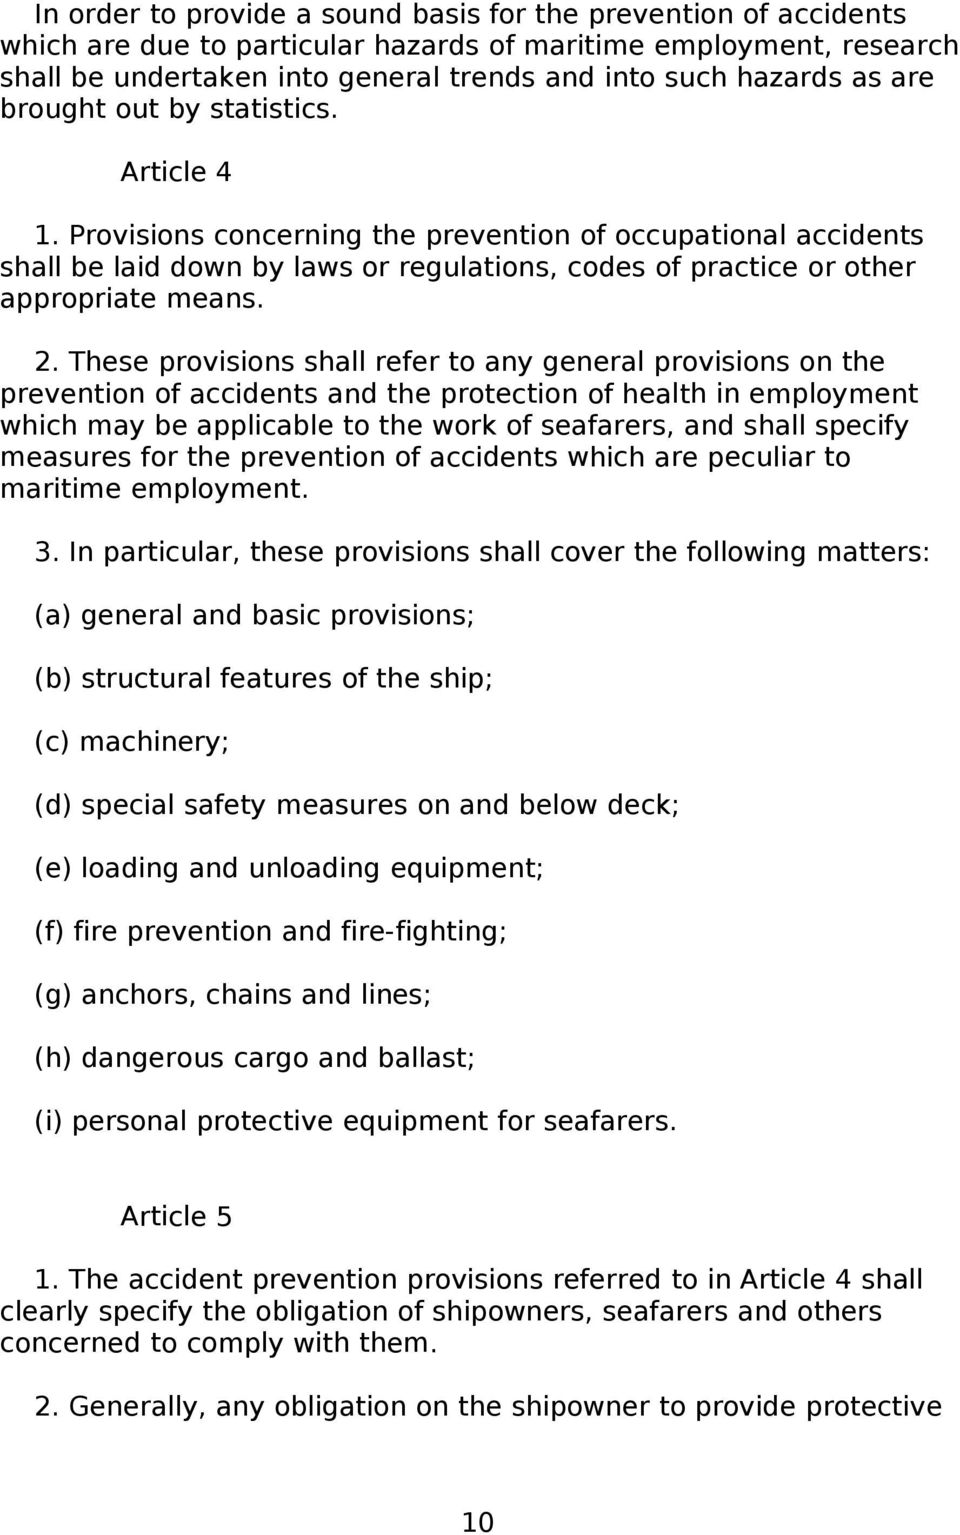 These provisions shall refer to any general provisions on the prevention of accidents and the protection of health in employment which may be applicable to the work of seafarers, and shall specify